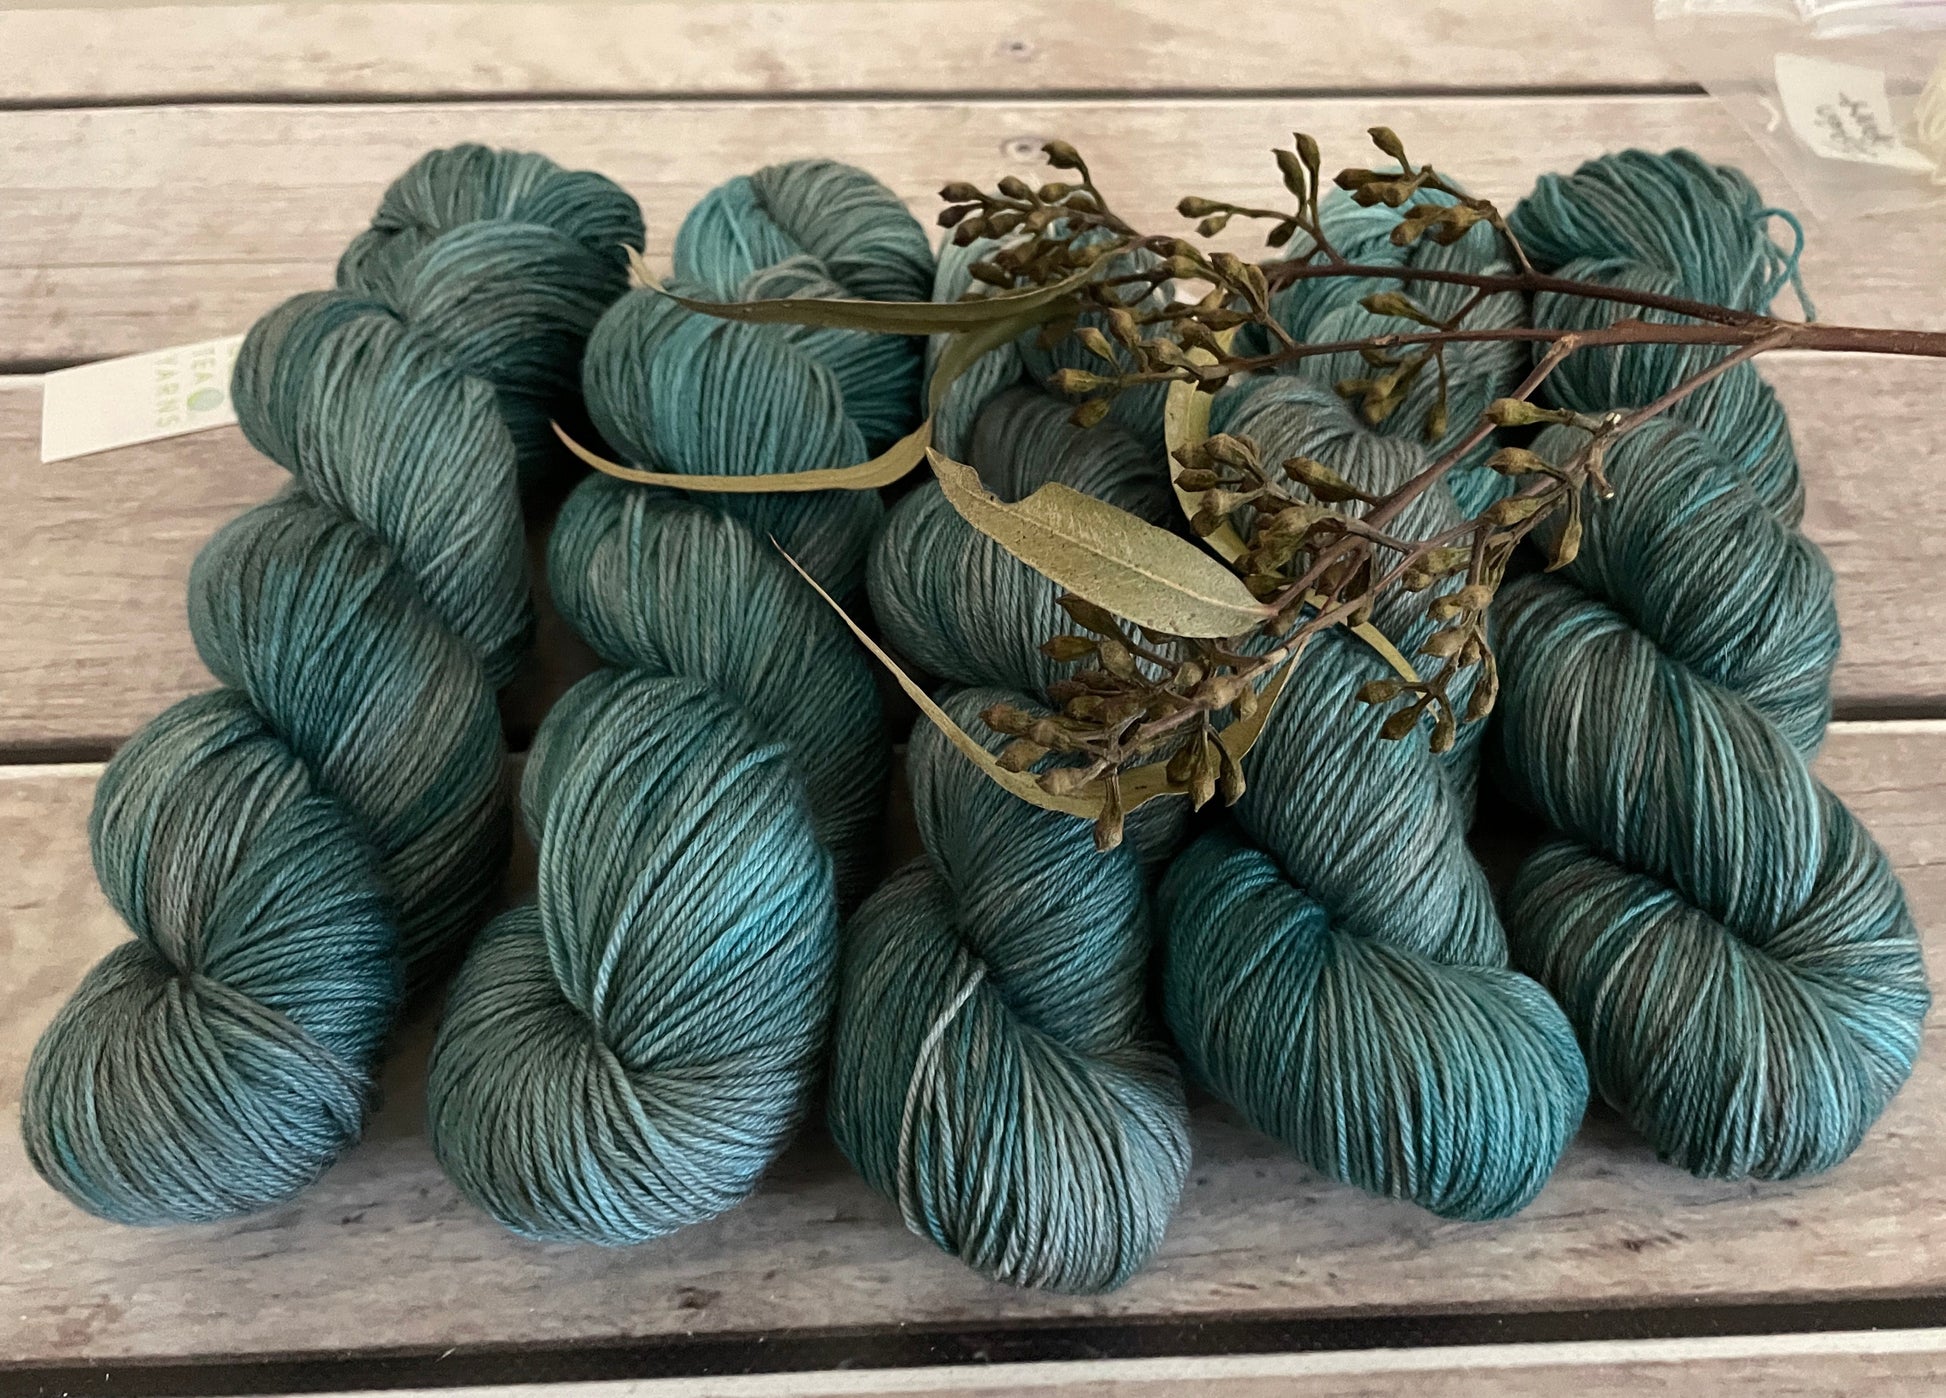 Five skeins of blue green yarn sit on top of a wooden boards. They have a sprig of ecalyptus sitting on them